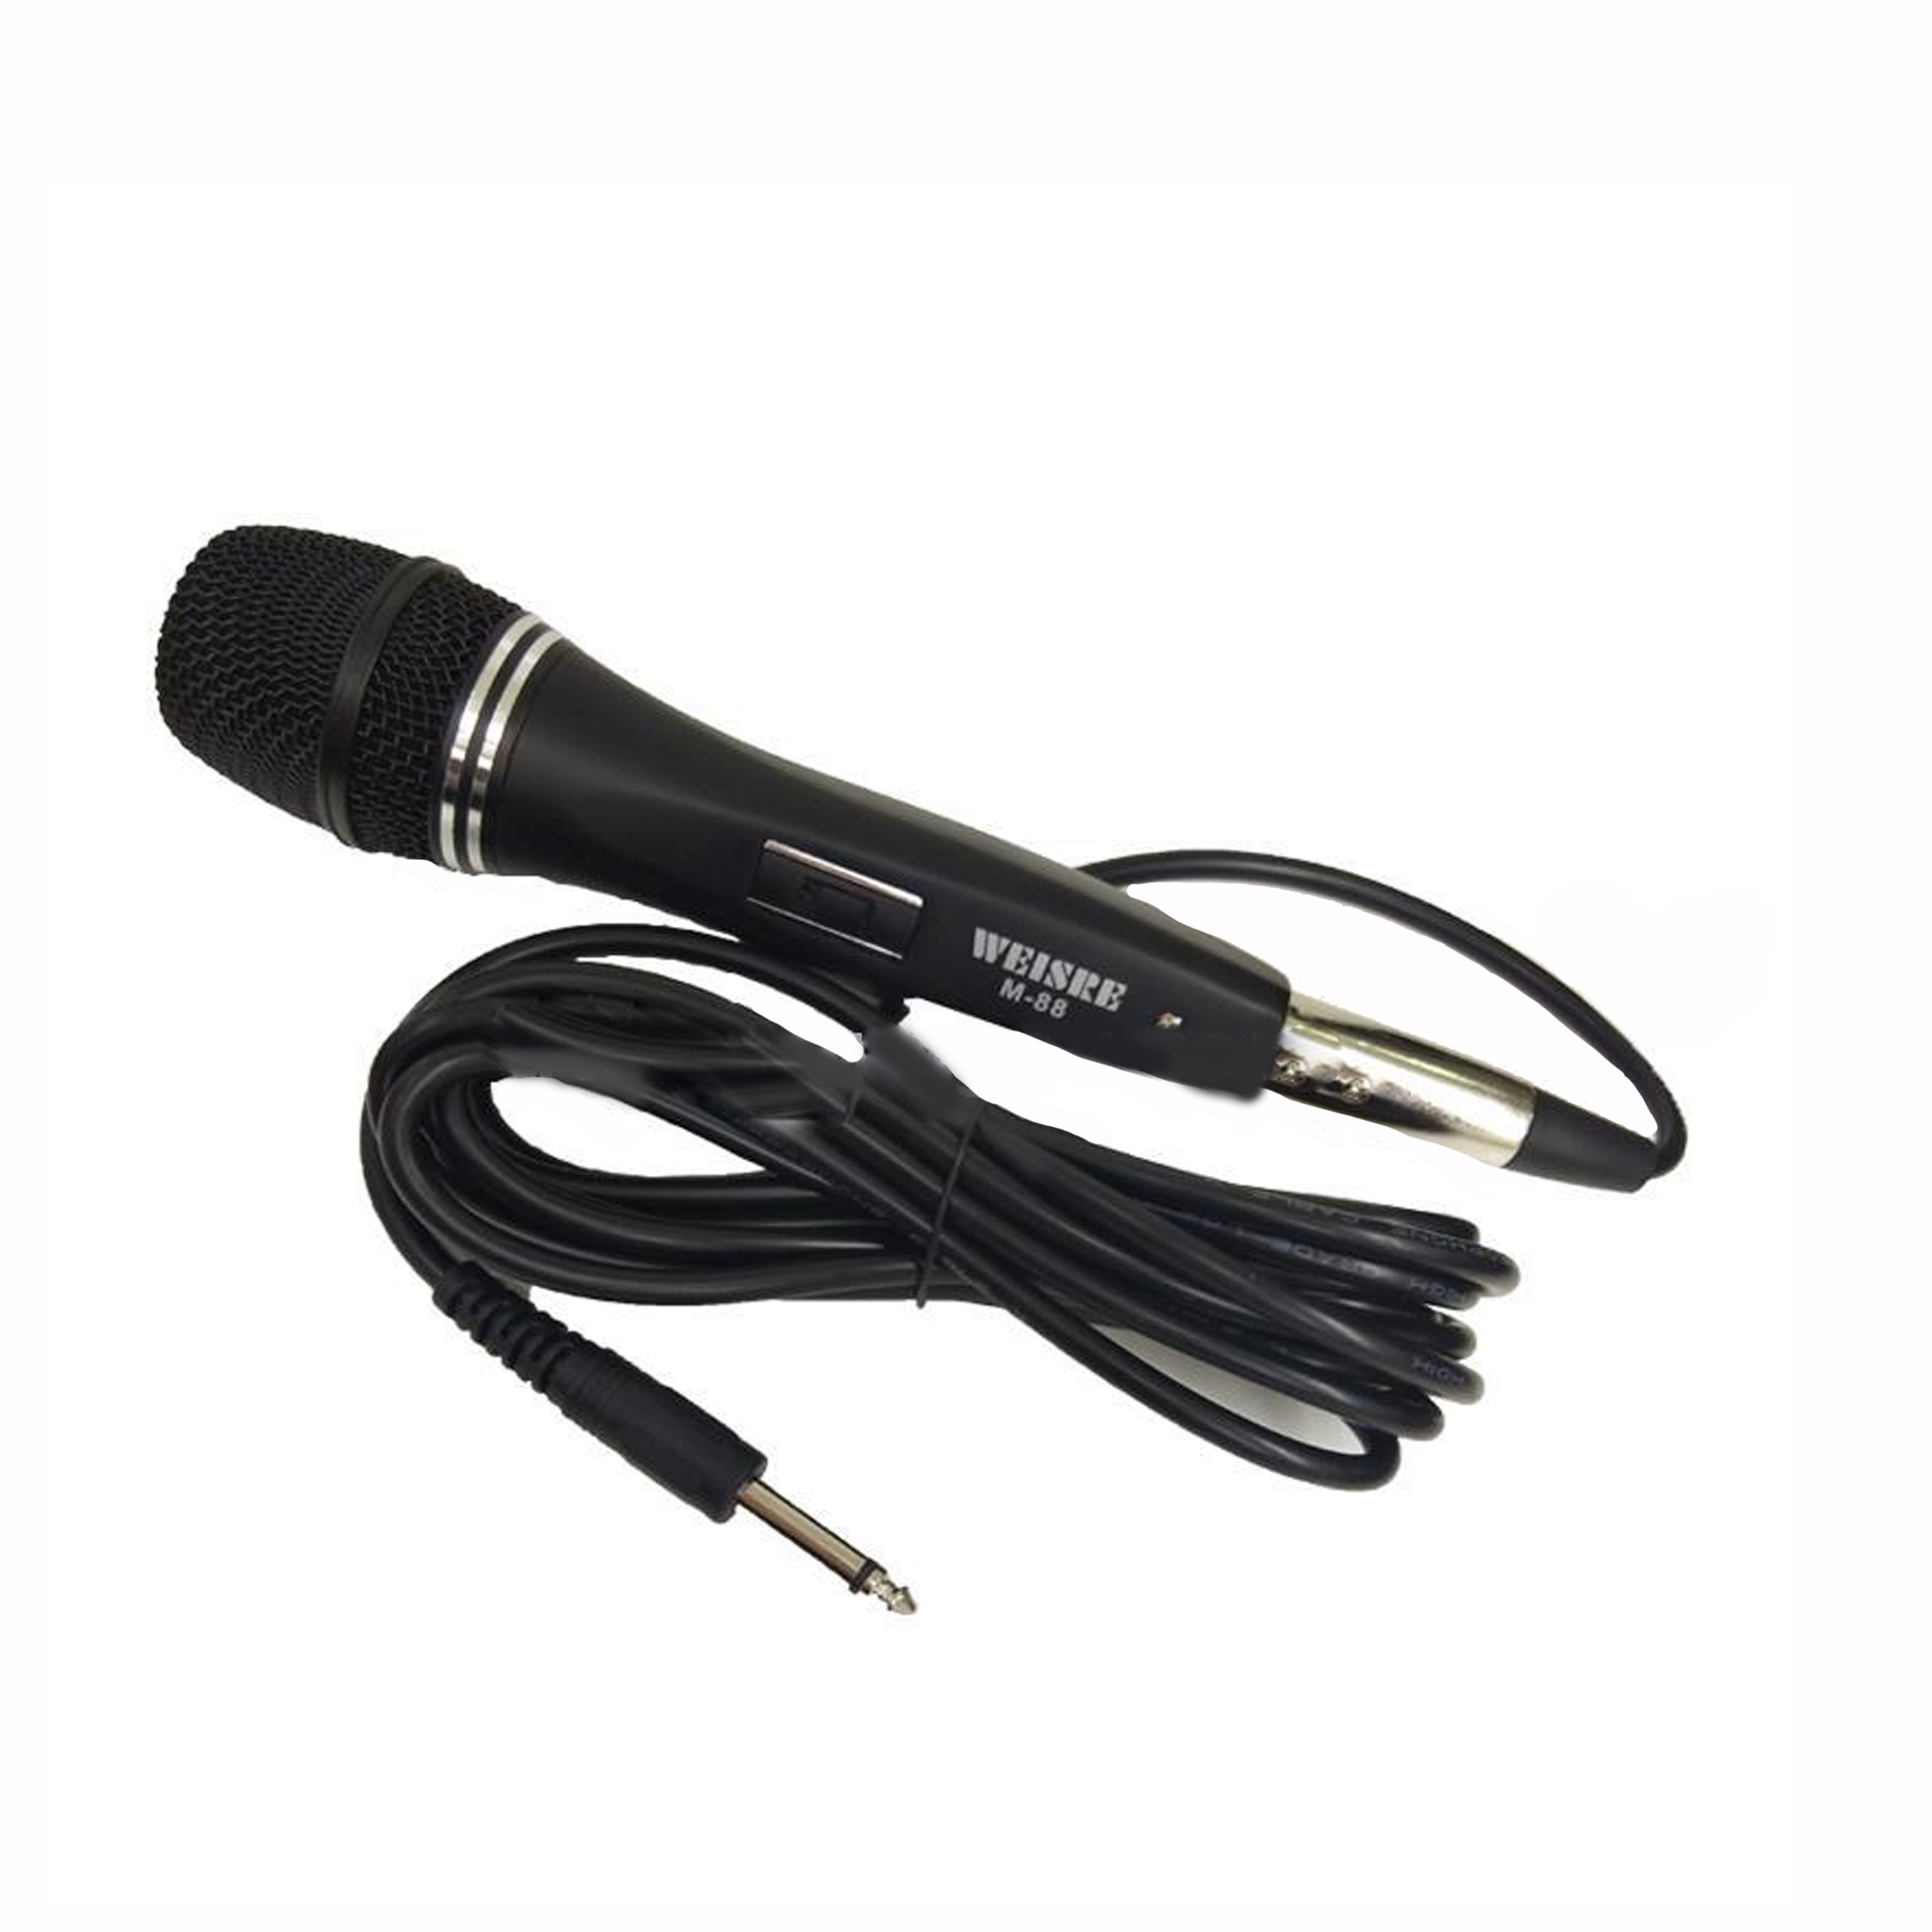 Weisre Pro Series Professional Dynamic Microphone Black, M-88